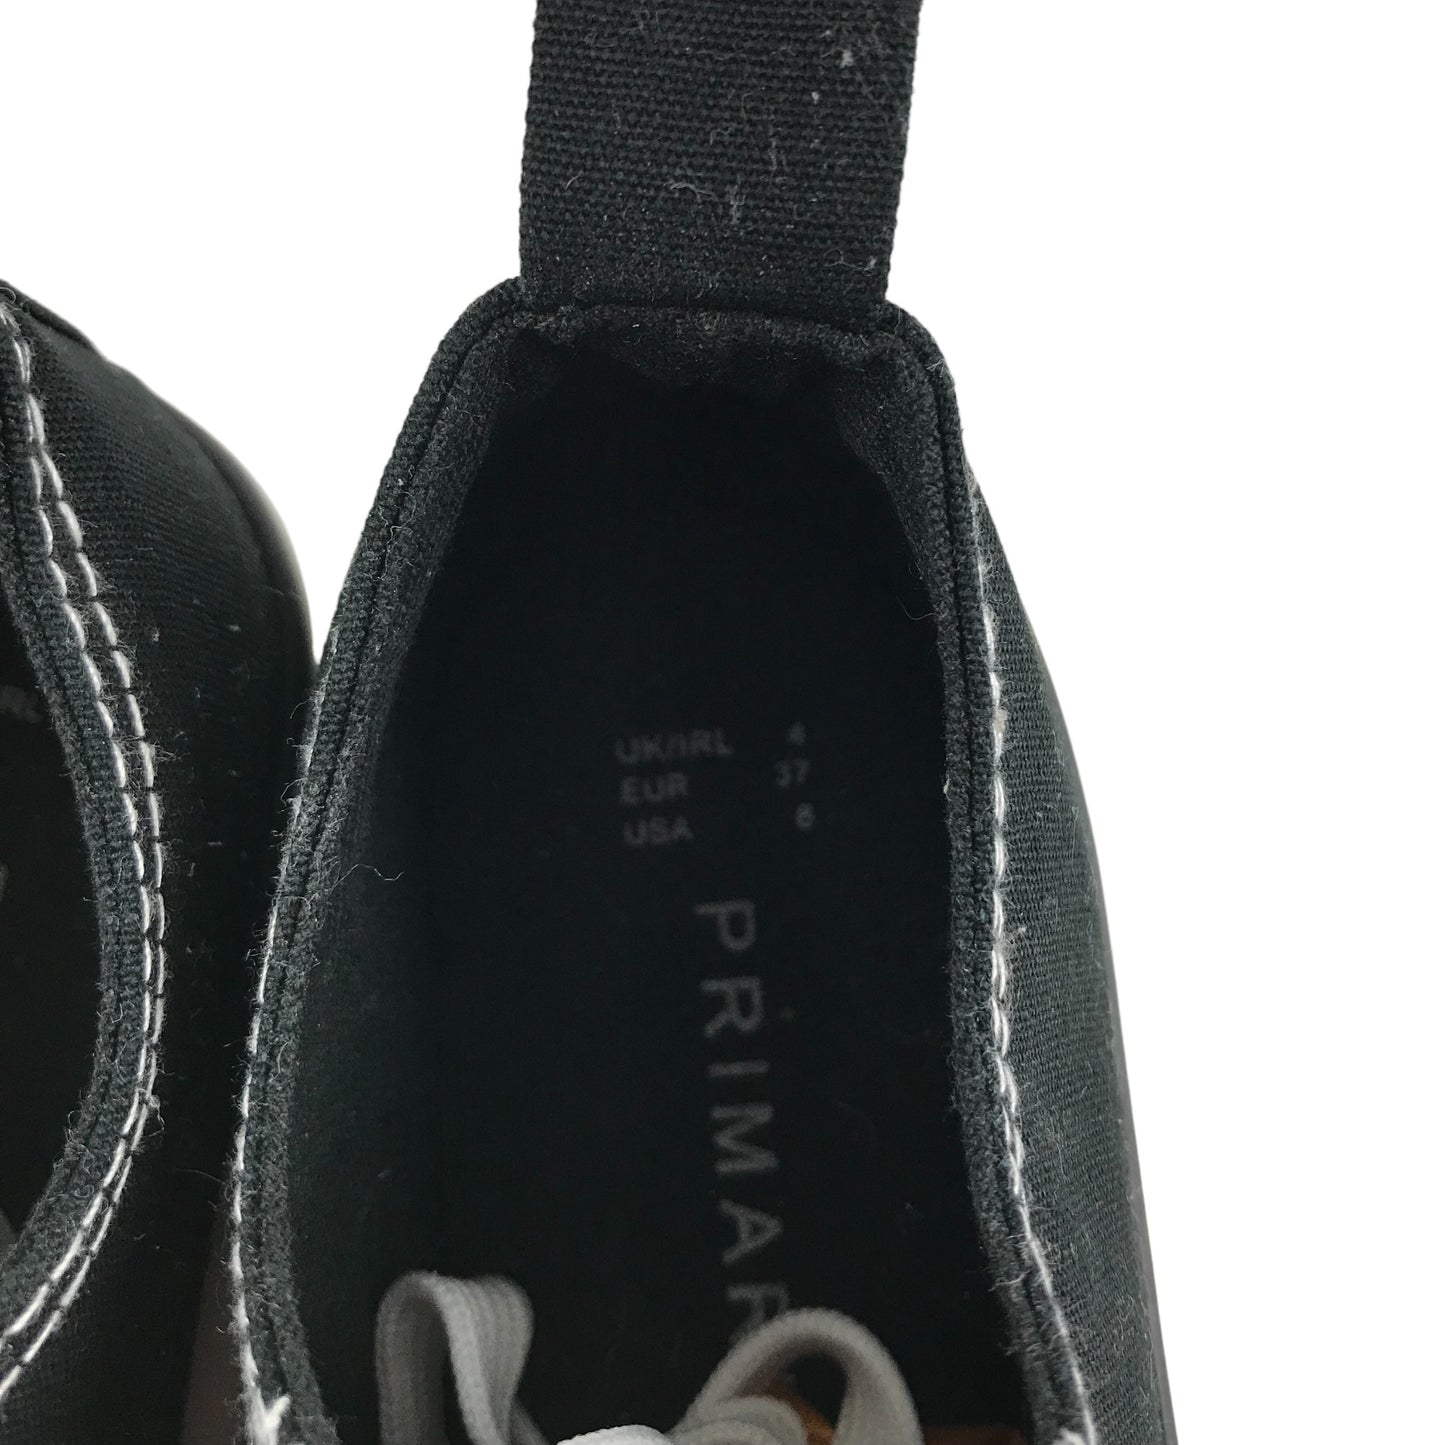 Primark Plimsole Trainers Shoe Size 4 Black White with Laces